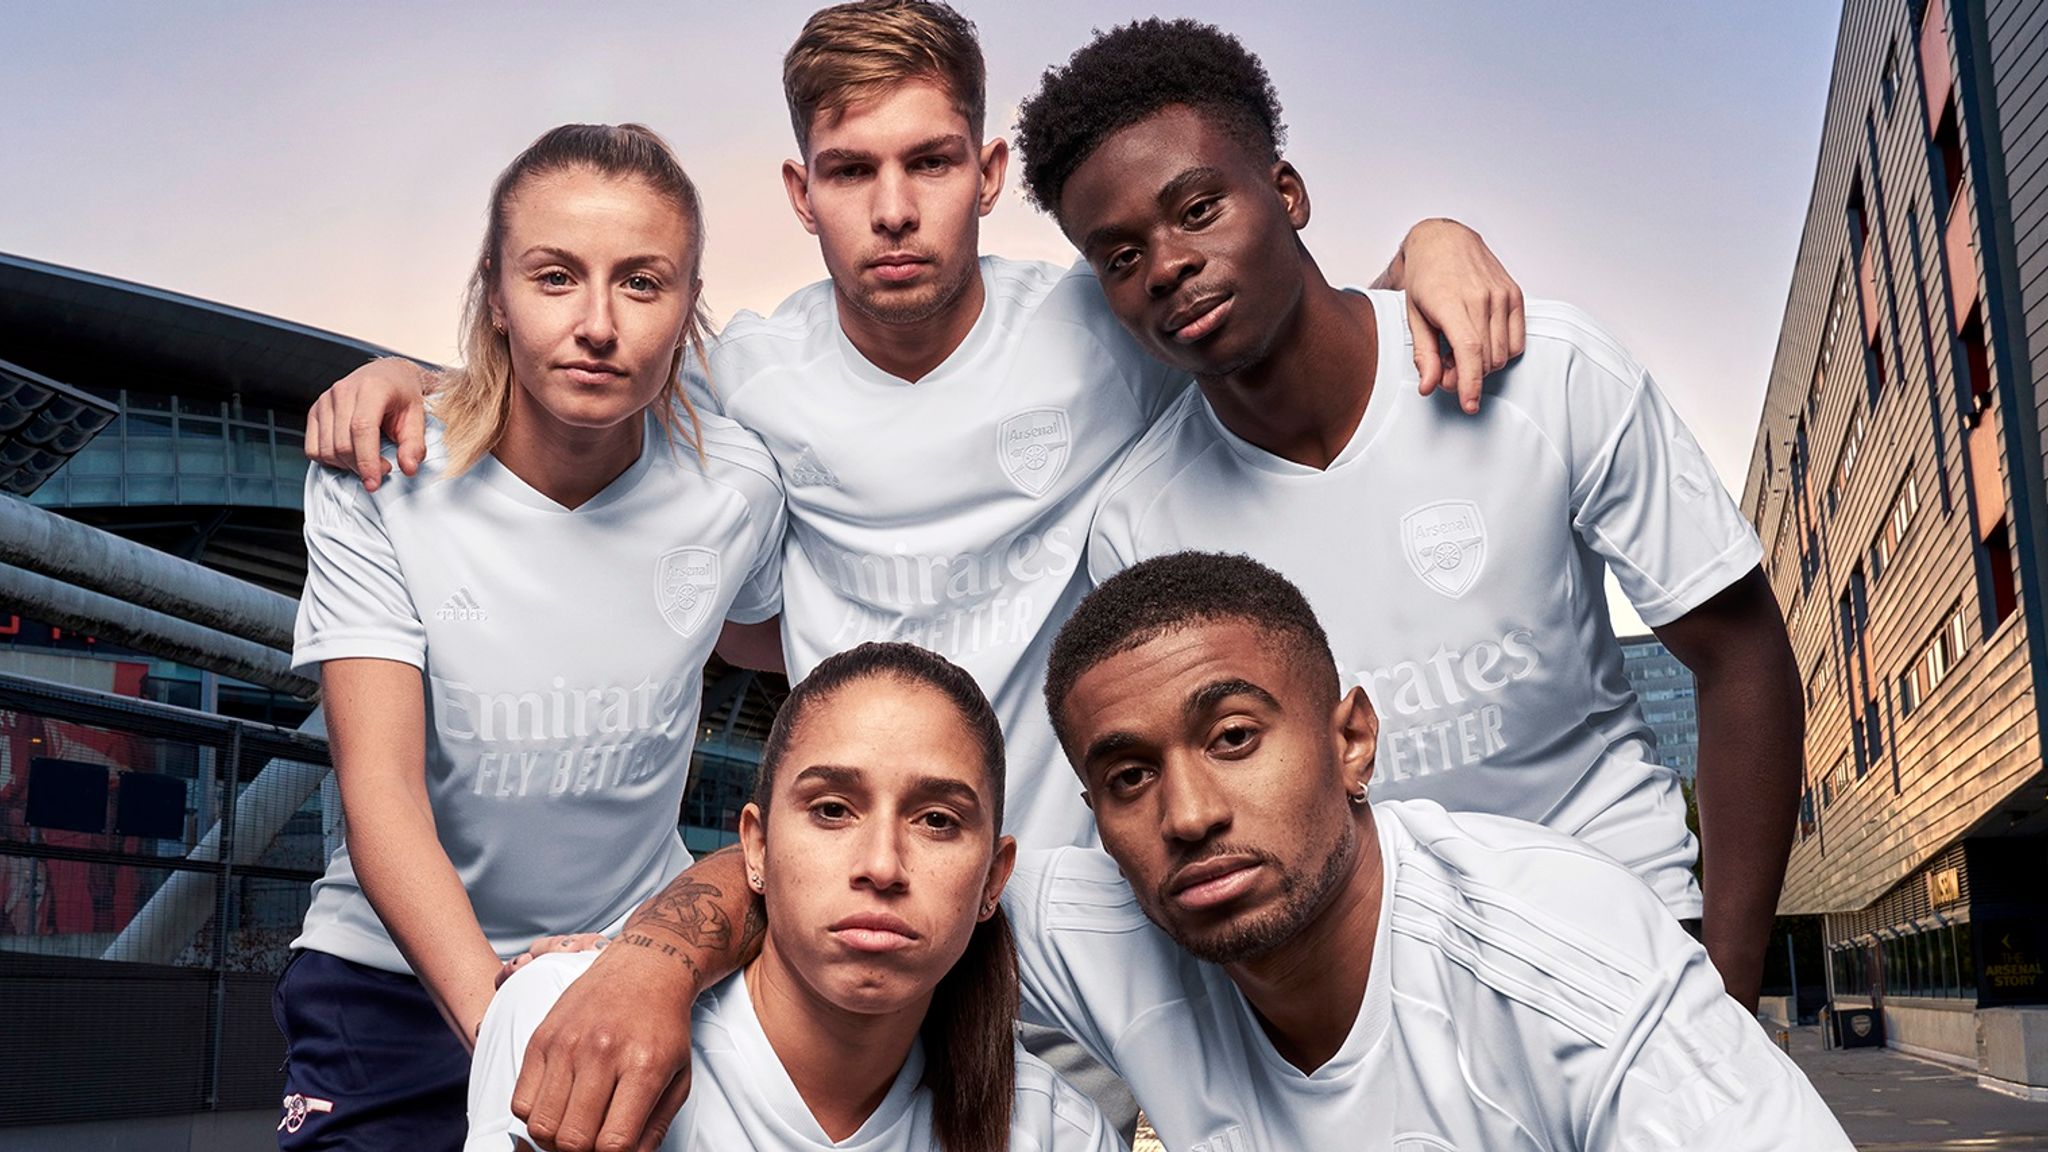 Enumerar Agradecido Mecánico Arsenal and adidas launch second phase of No More Red campaign with men's  team to wear all-white kit in FA Cup third round | Football News | Sky  Sports